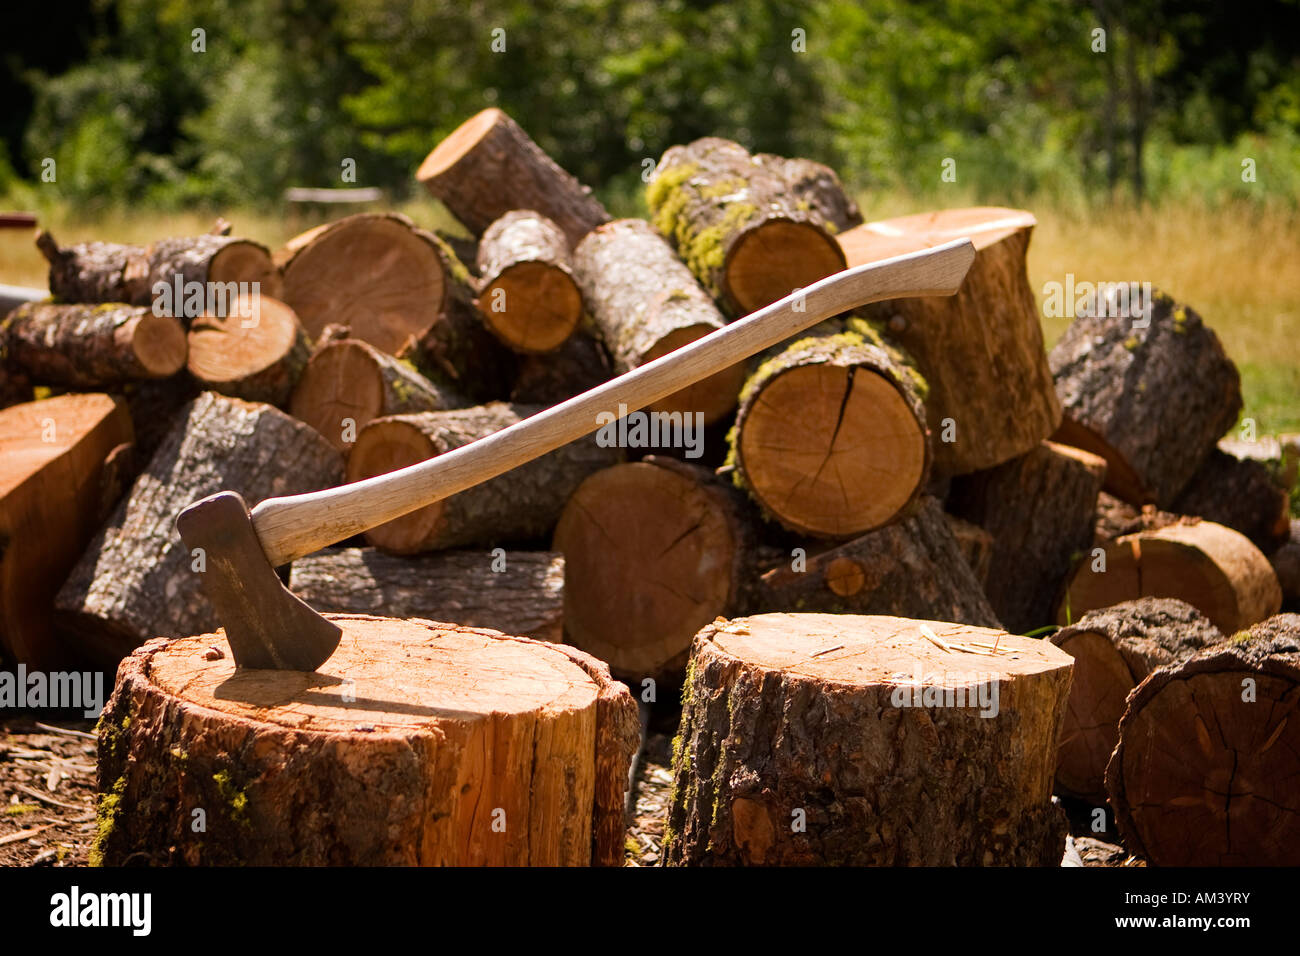 Woodsman's axe with a pile of cut logs. Stock Photo